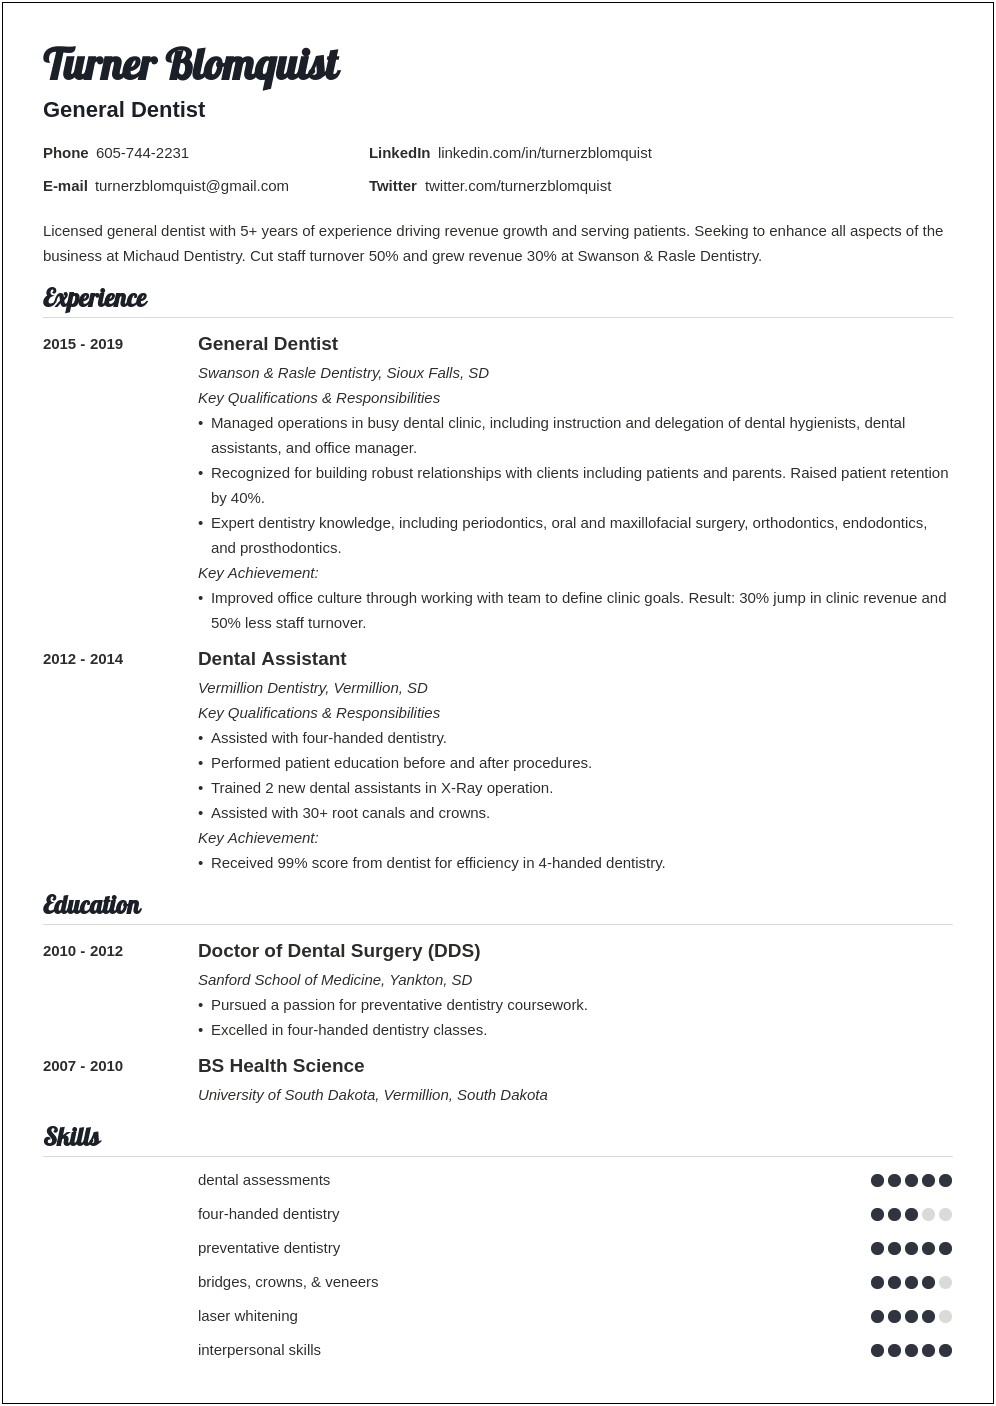 Resume To Get A Job As A Dentist